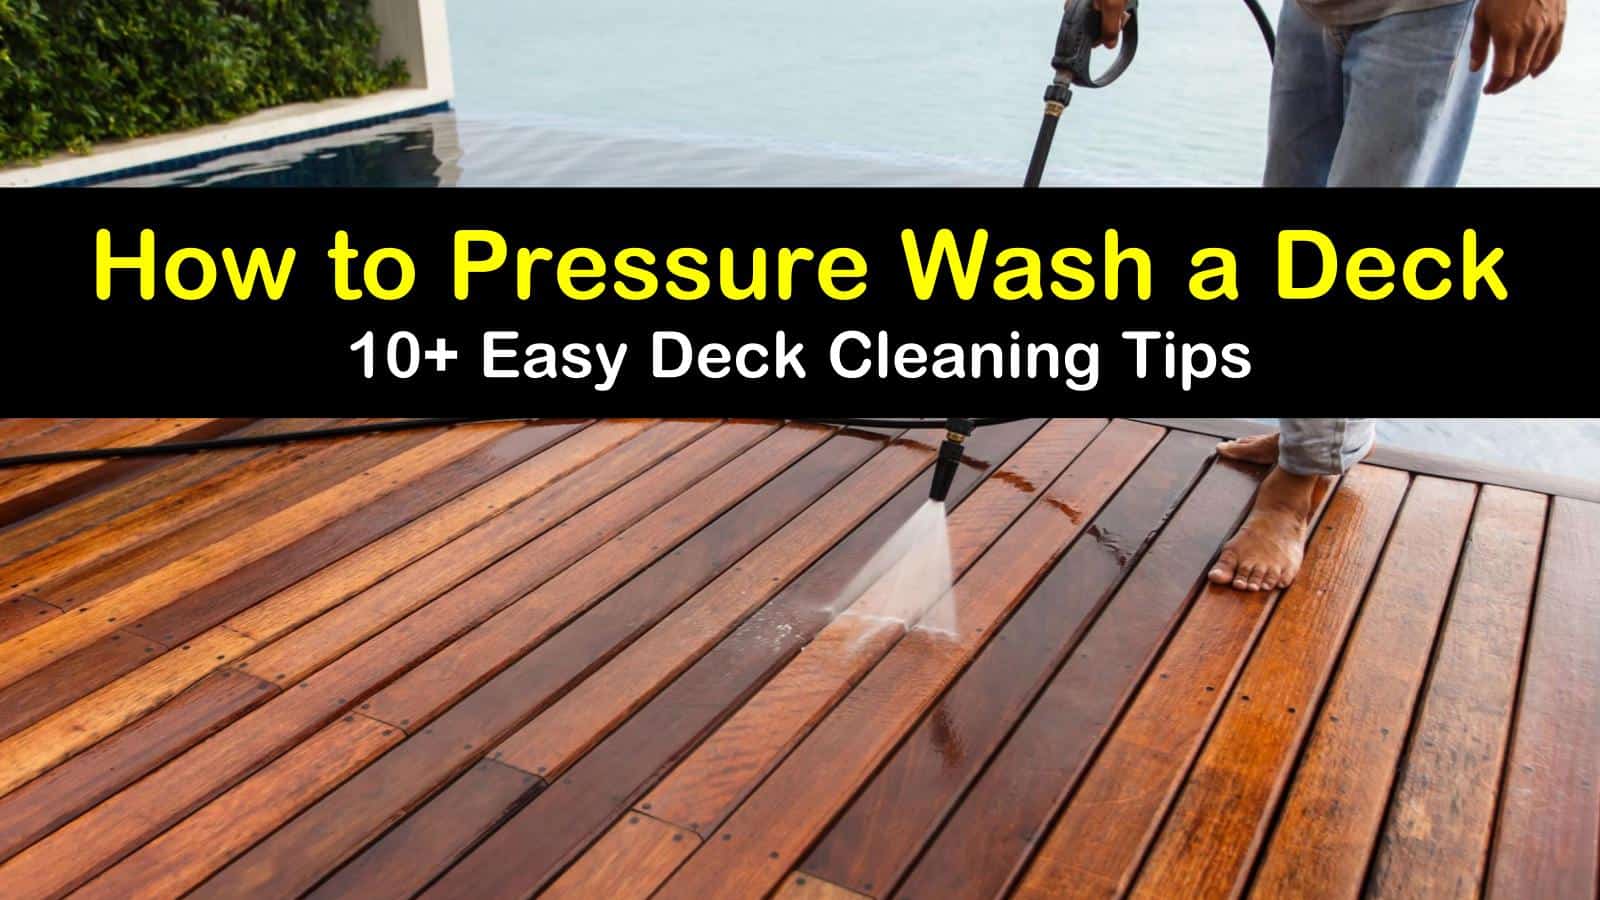 how to pressure wash a deck titleimg1